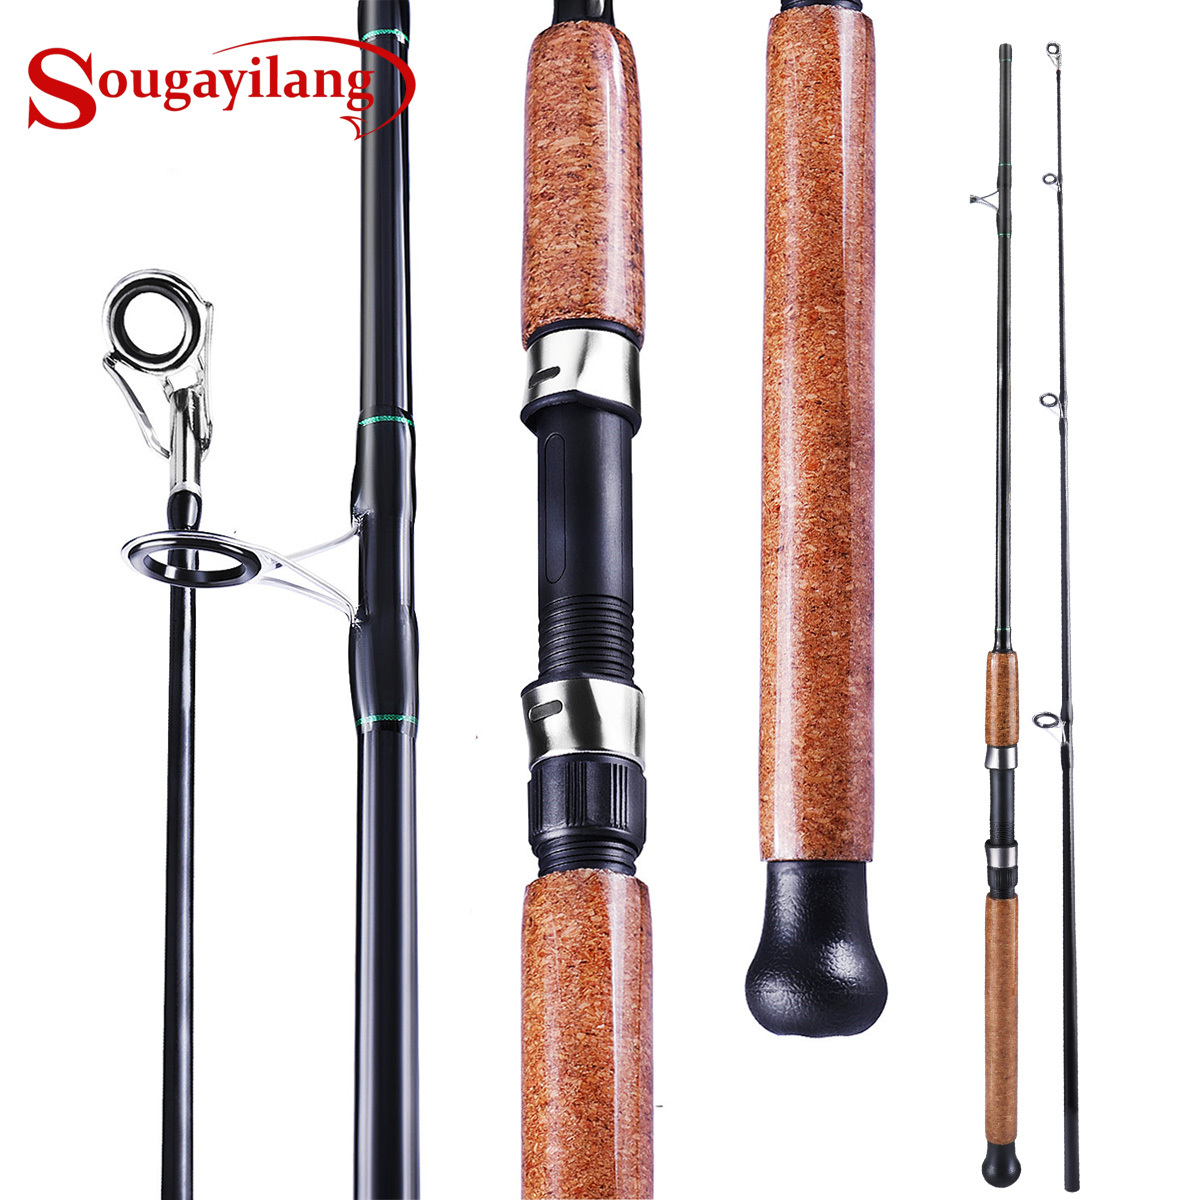 Sougayilang Fishing Rod, 180cm/5.91ft Strong & Durable Composite Graphite  And Glass Fiber Blanks, Fishing Pole With Cork Handle, MH Power Spinning Rod